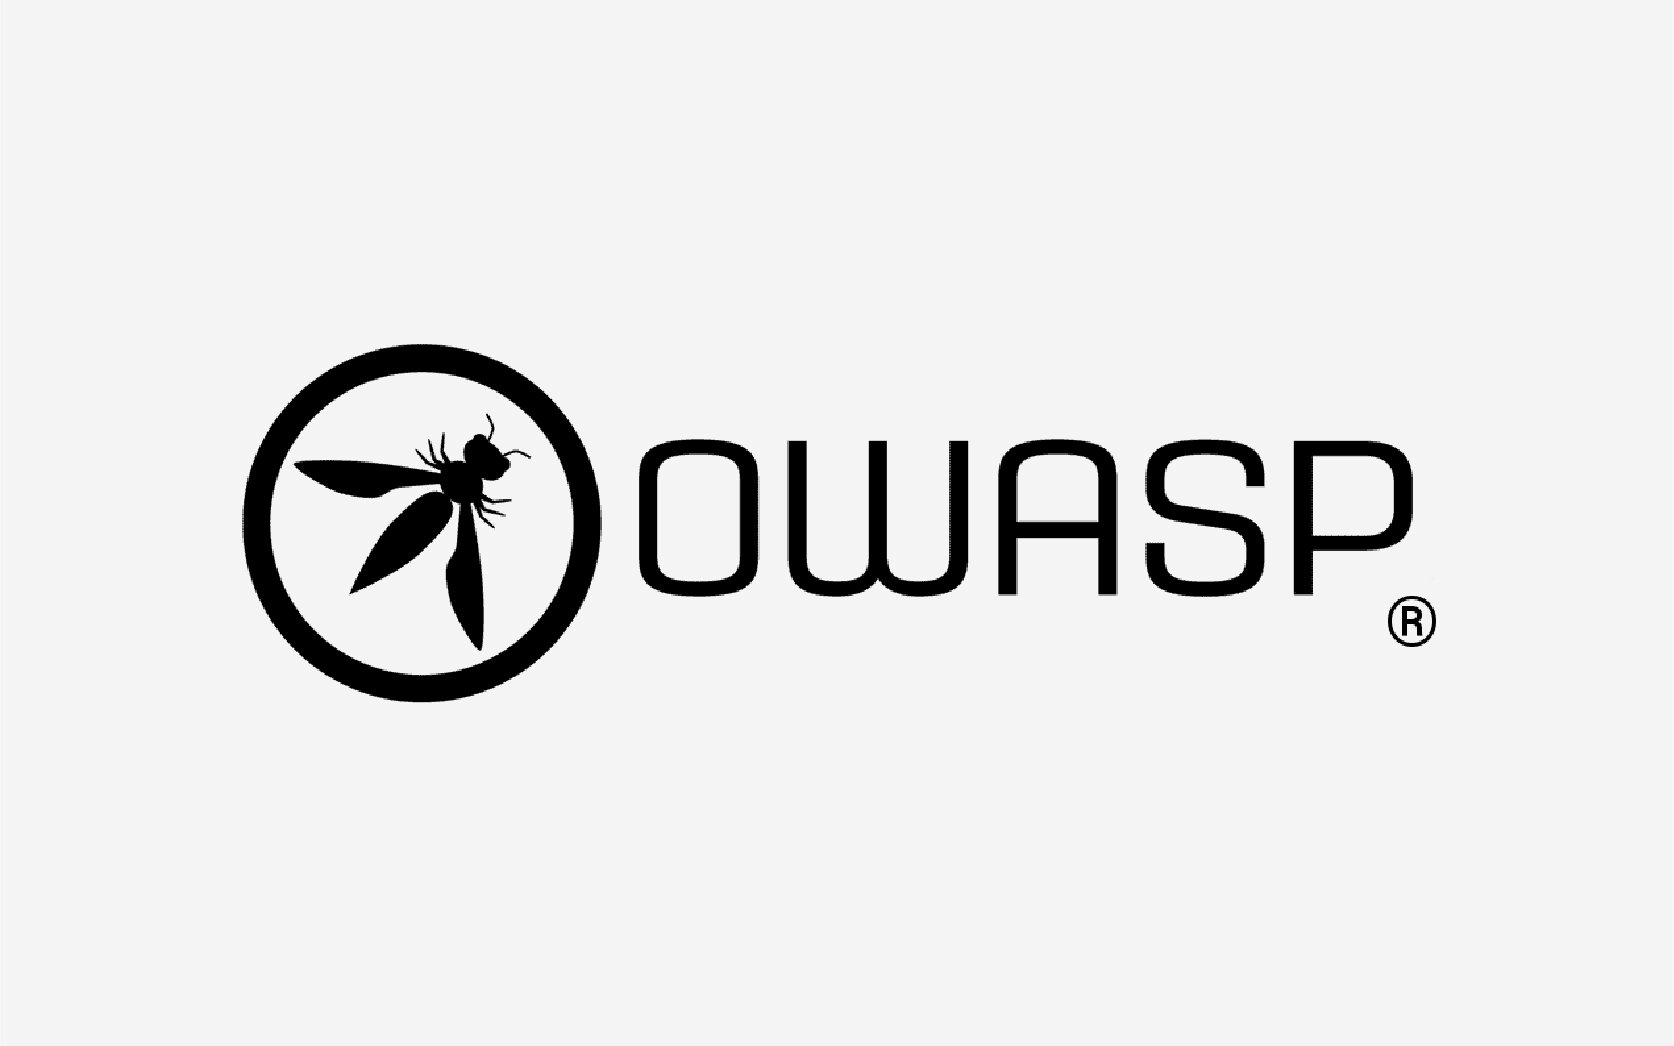 Security by design. Wir orientieren uns an OWASP (Open Web Application Security Project) Top10.